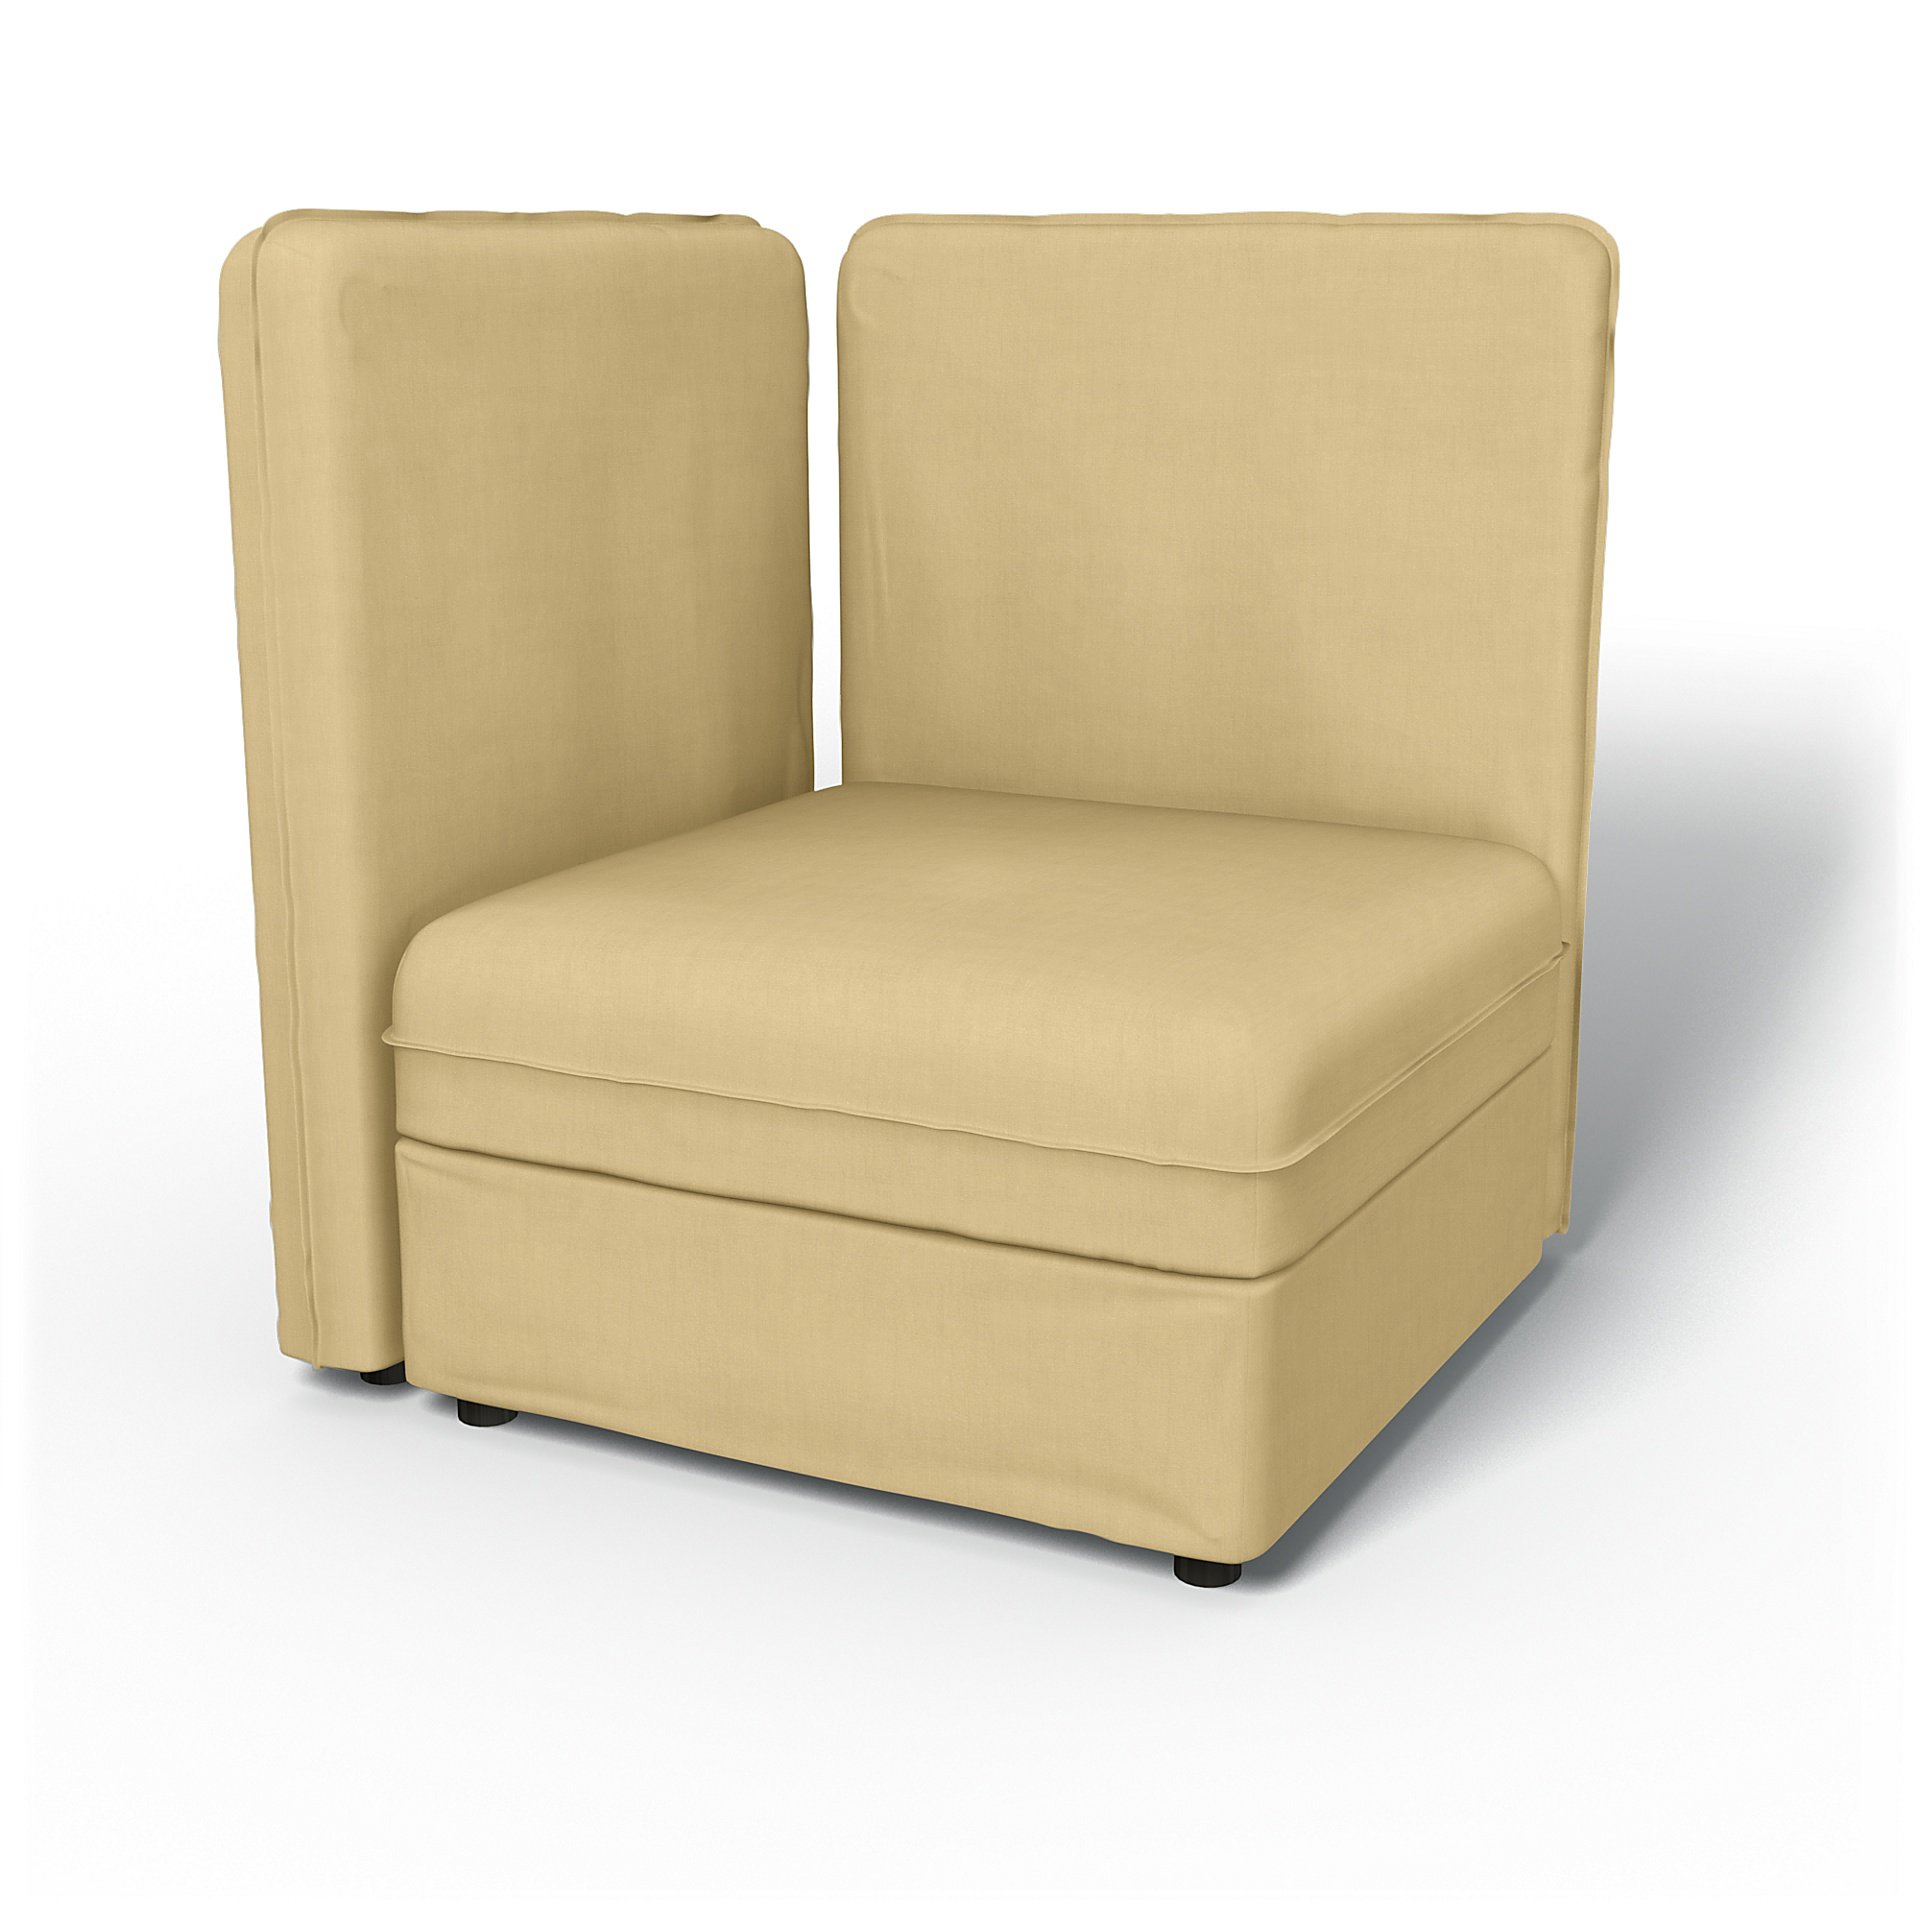 IKEA - Vallentuna Corner Seat Module with High Back and Storage Cover 80x80 32x32in, Straw Yellow, L